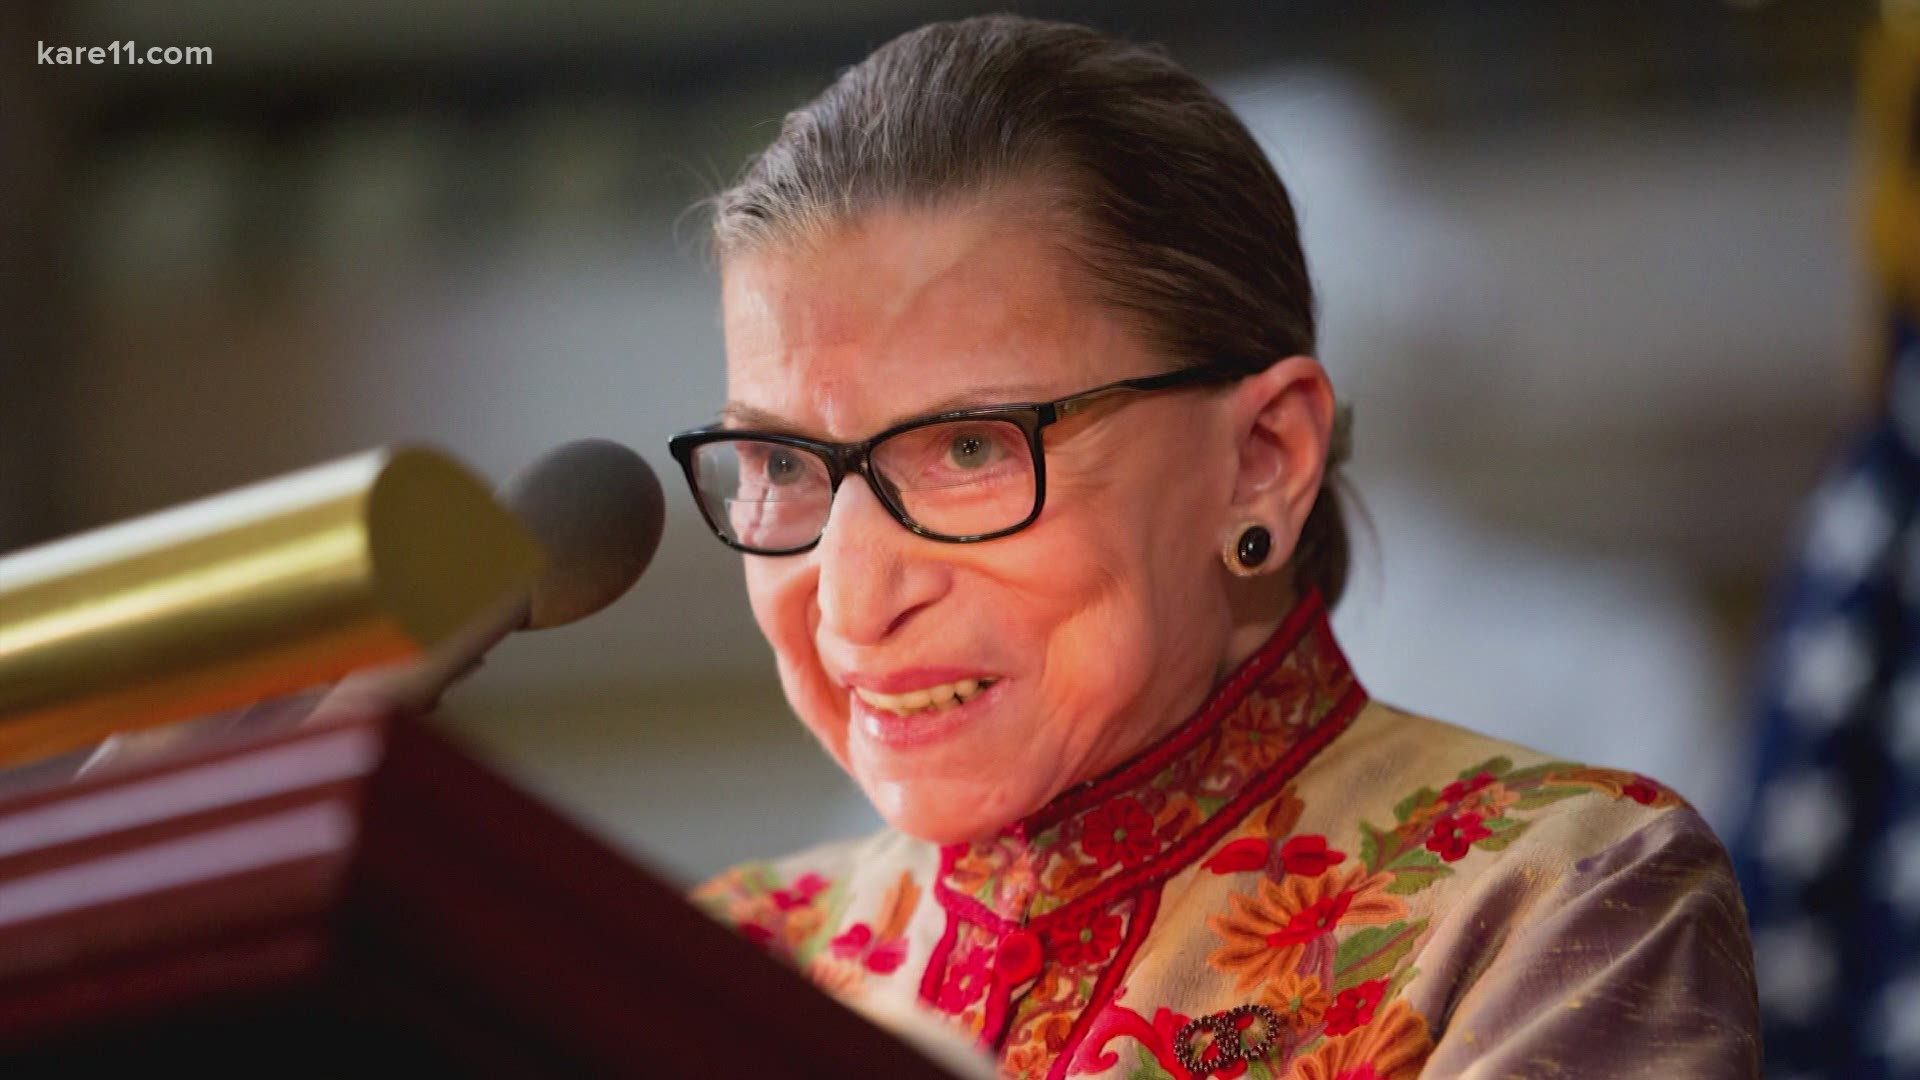 She was called notorious, known as a champion for women’s rights, and Ruth Bader Ginsburg was a pioneer whose mark on our nation is almost immeasurable.